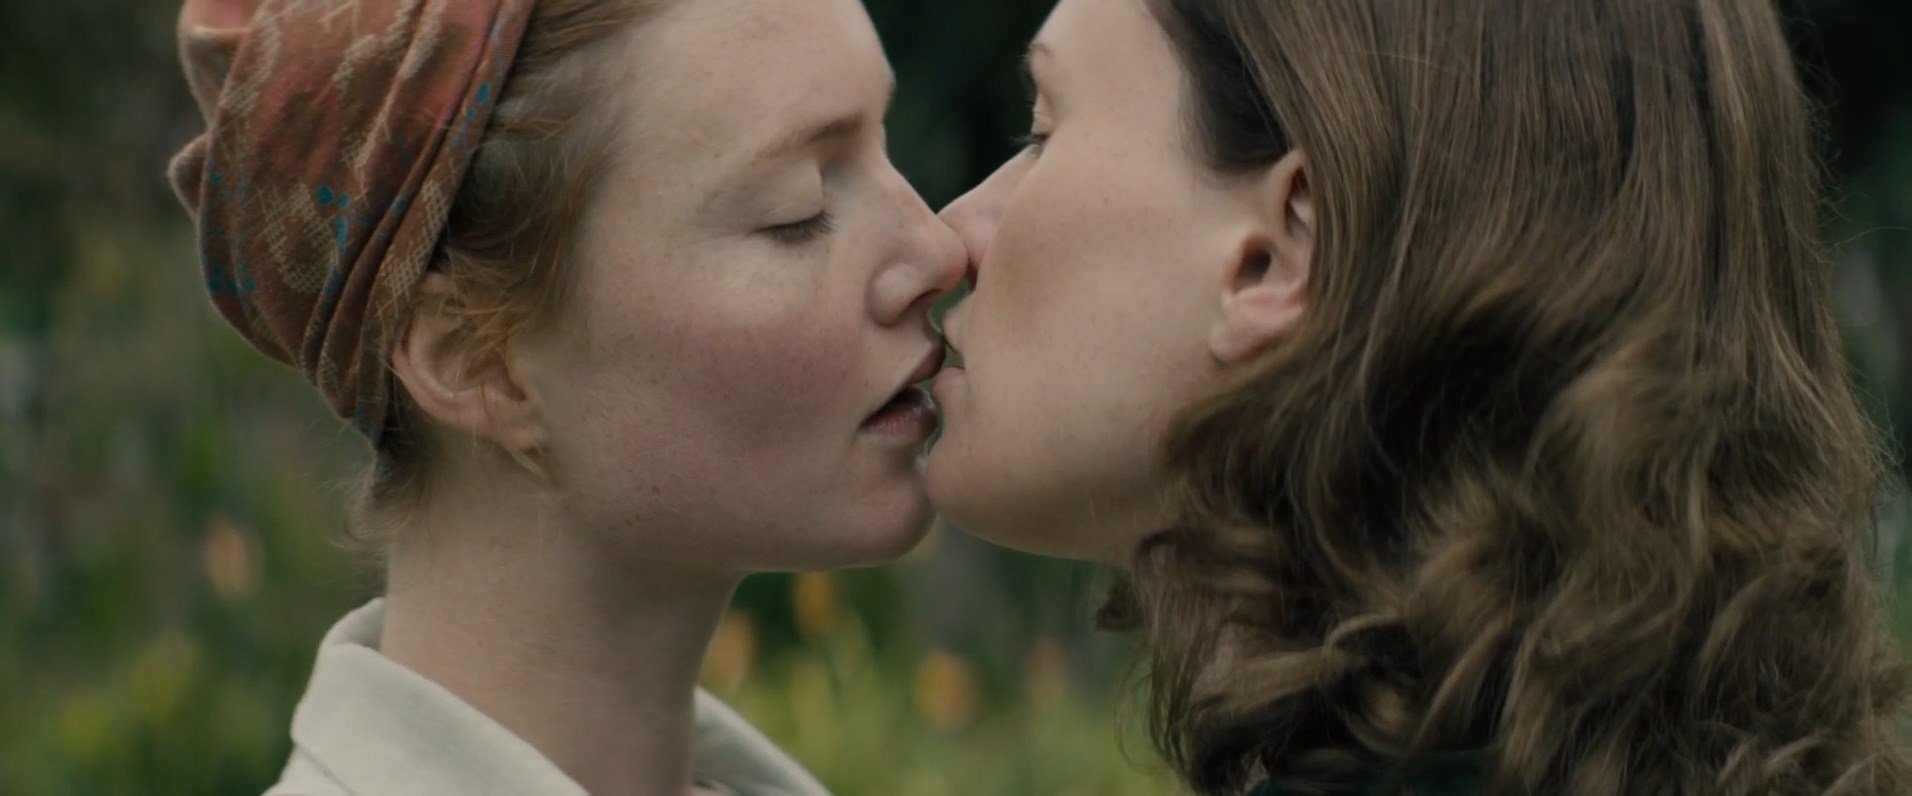 Holliday Grainger, Anna Paquin Nude - Tell It to the Bees (14 Pics + GIFs & Video)